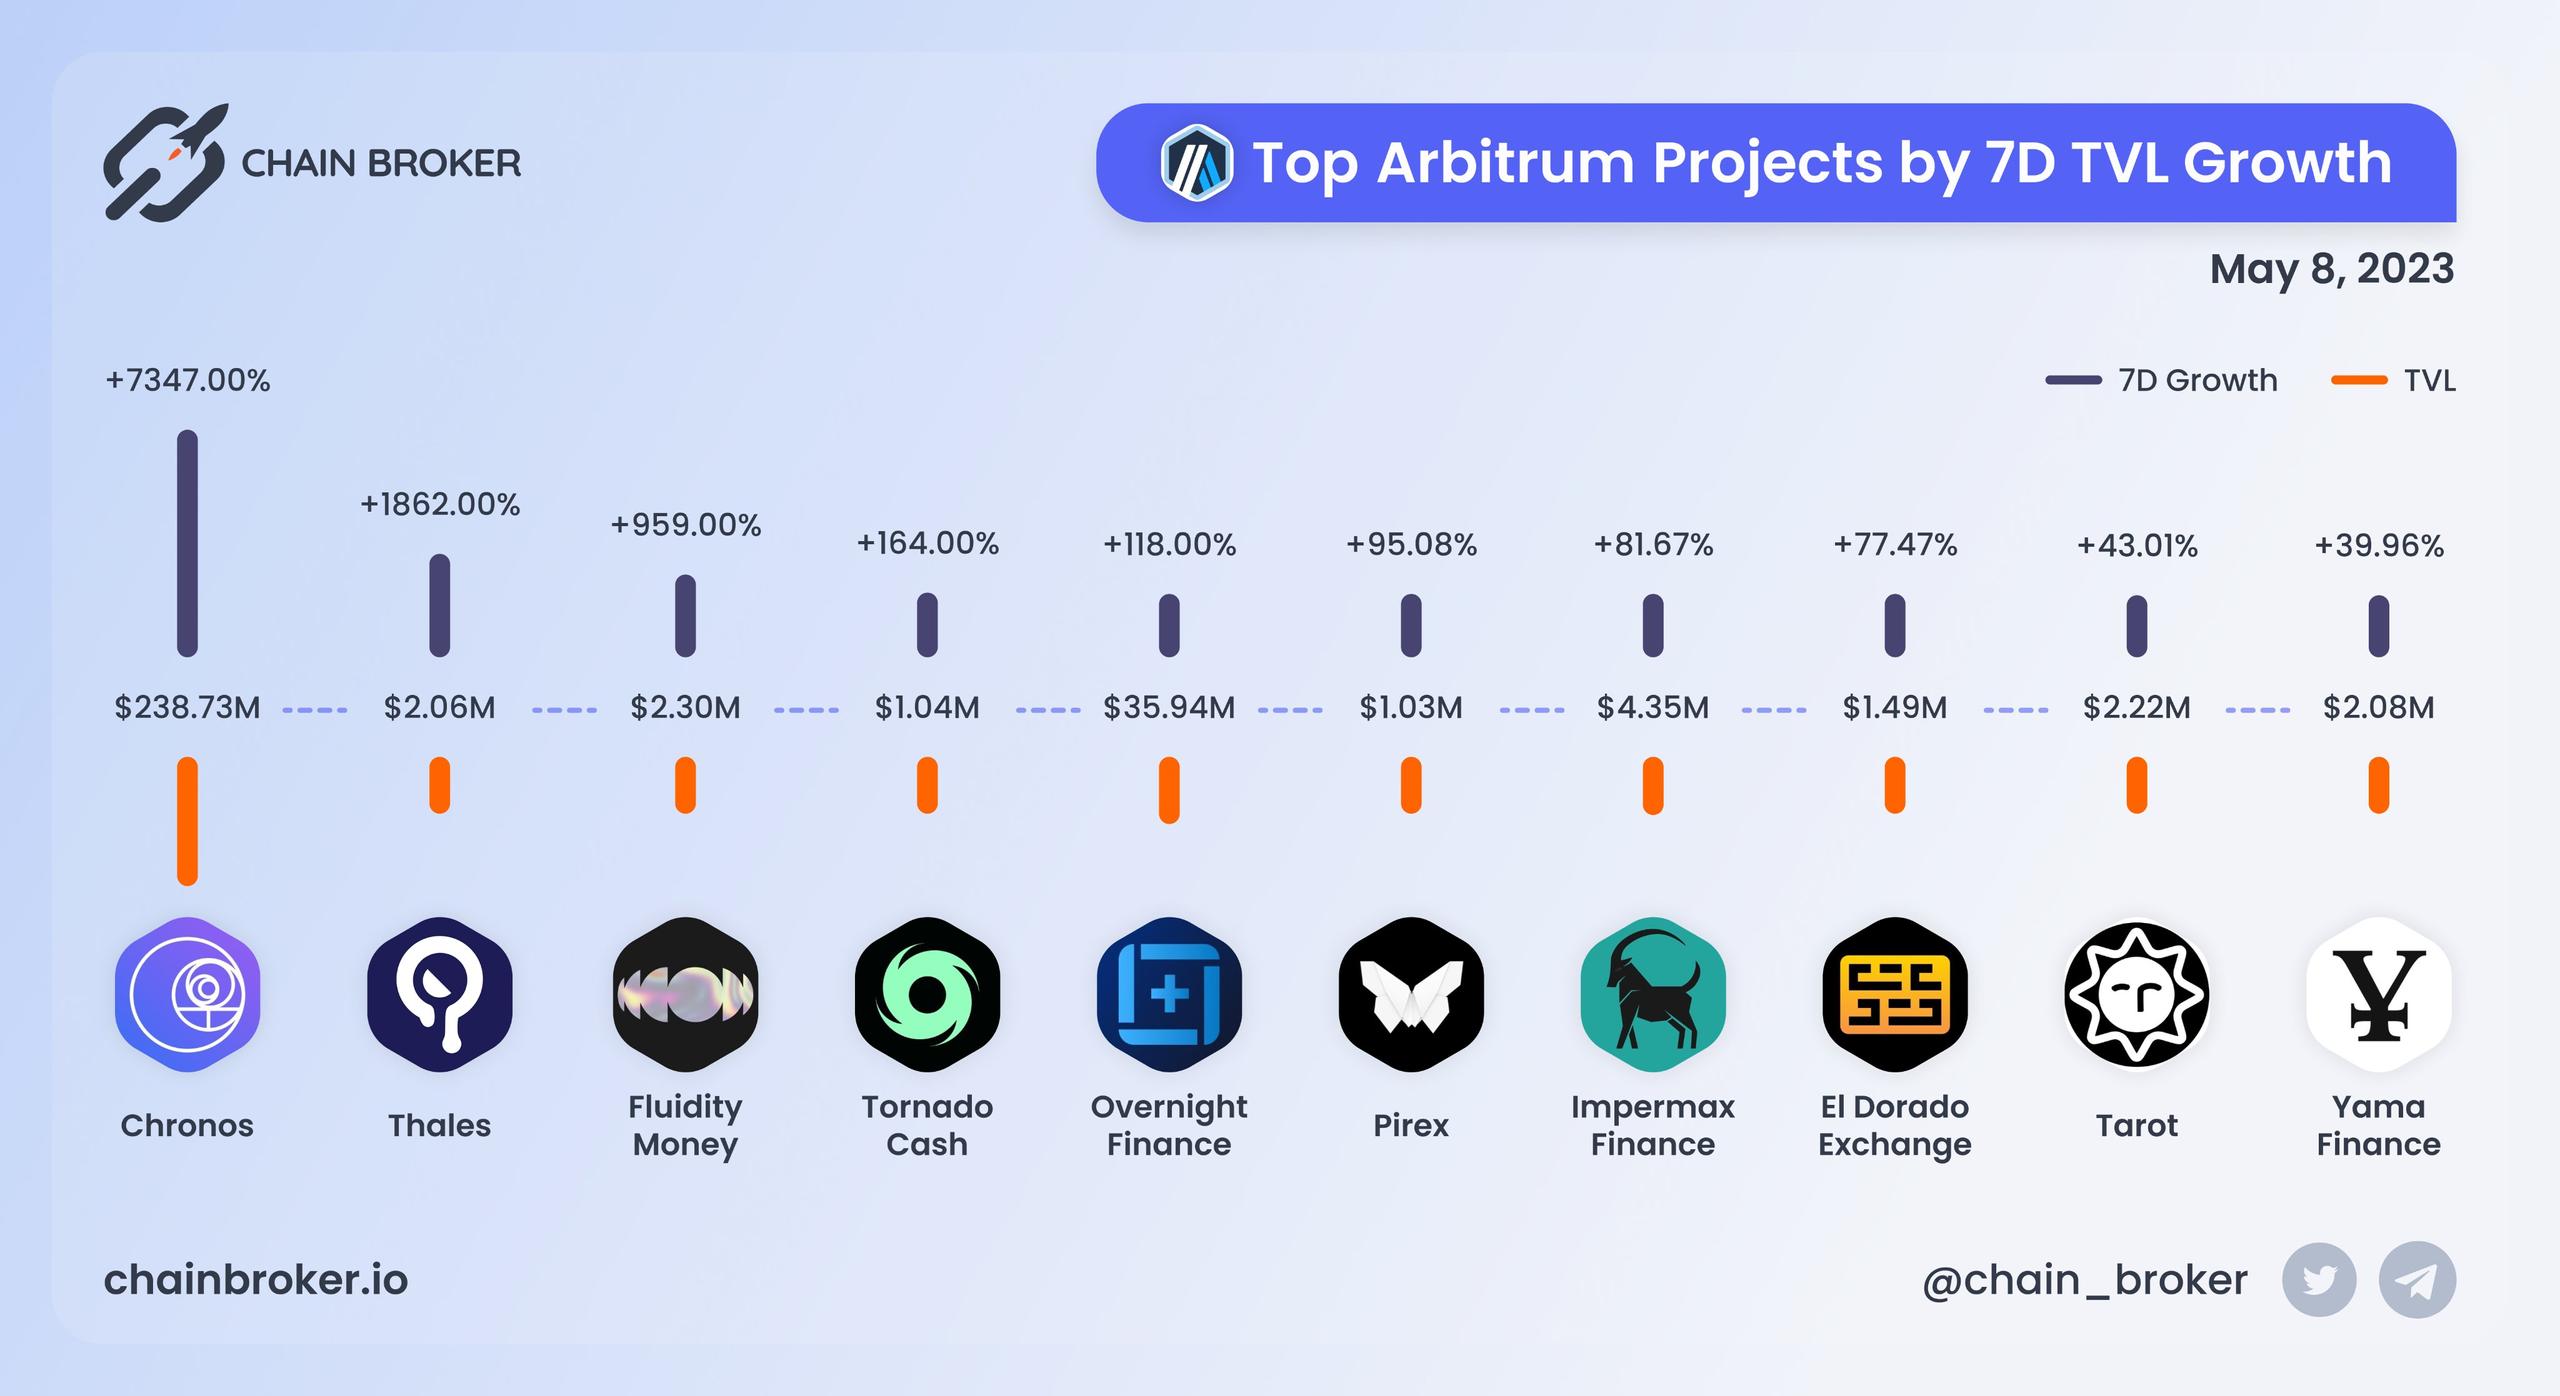 Top Arbitrum projects by 7D TVL growth